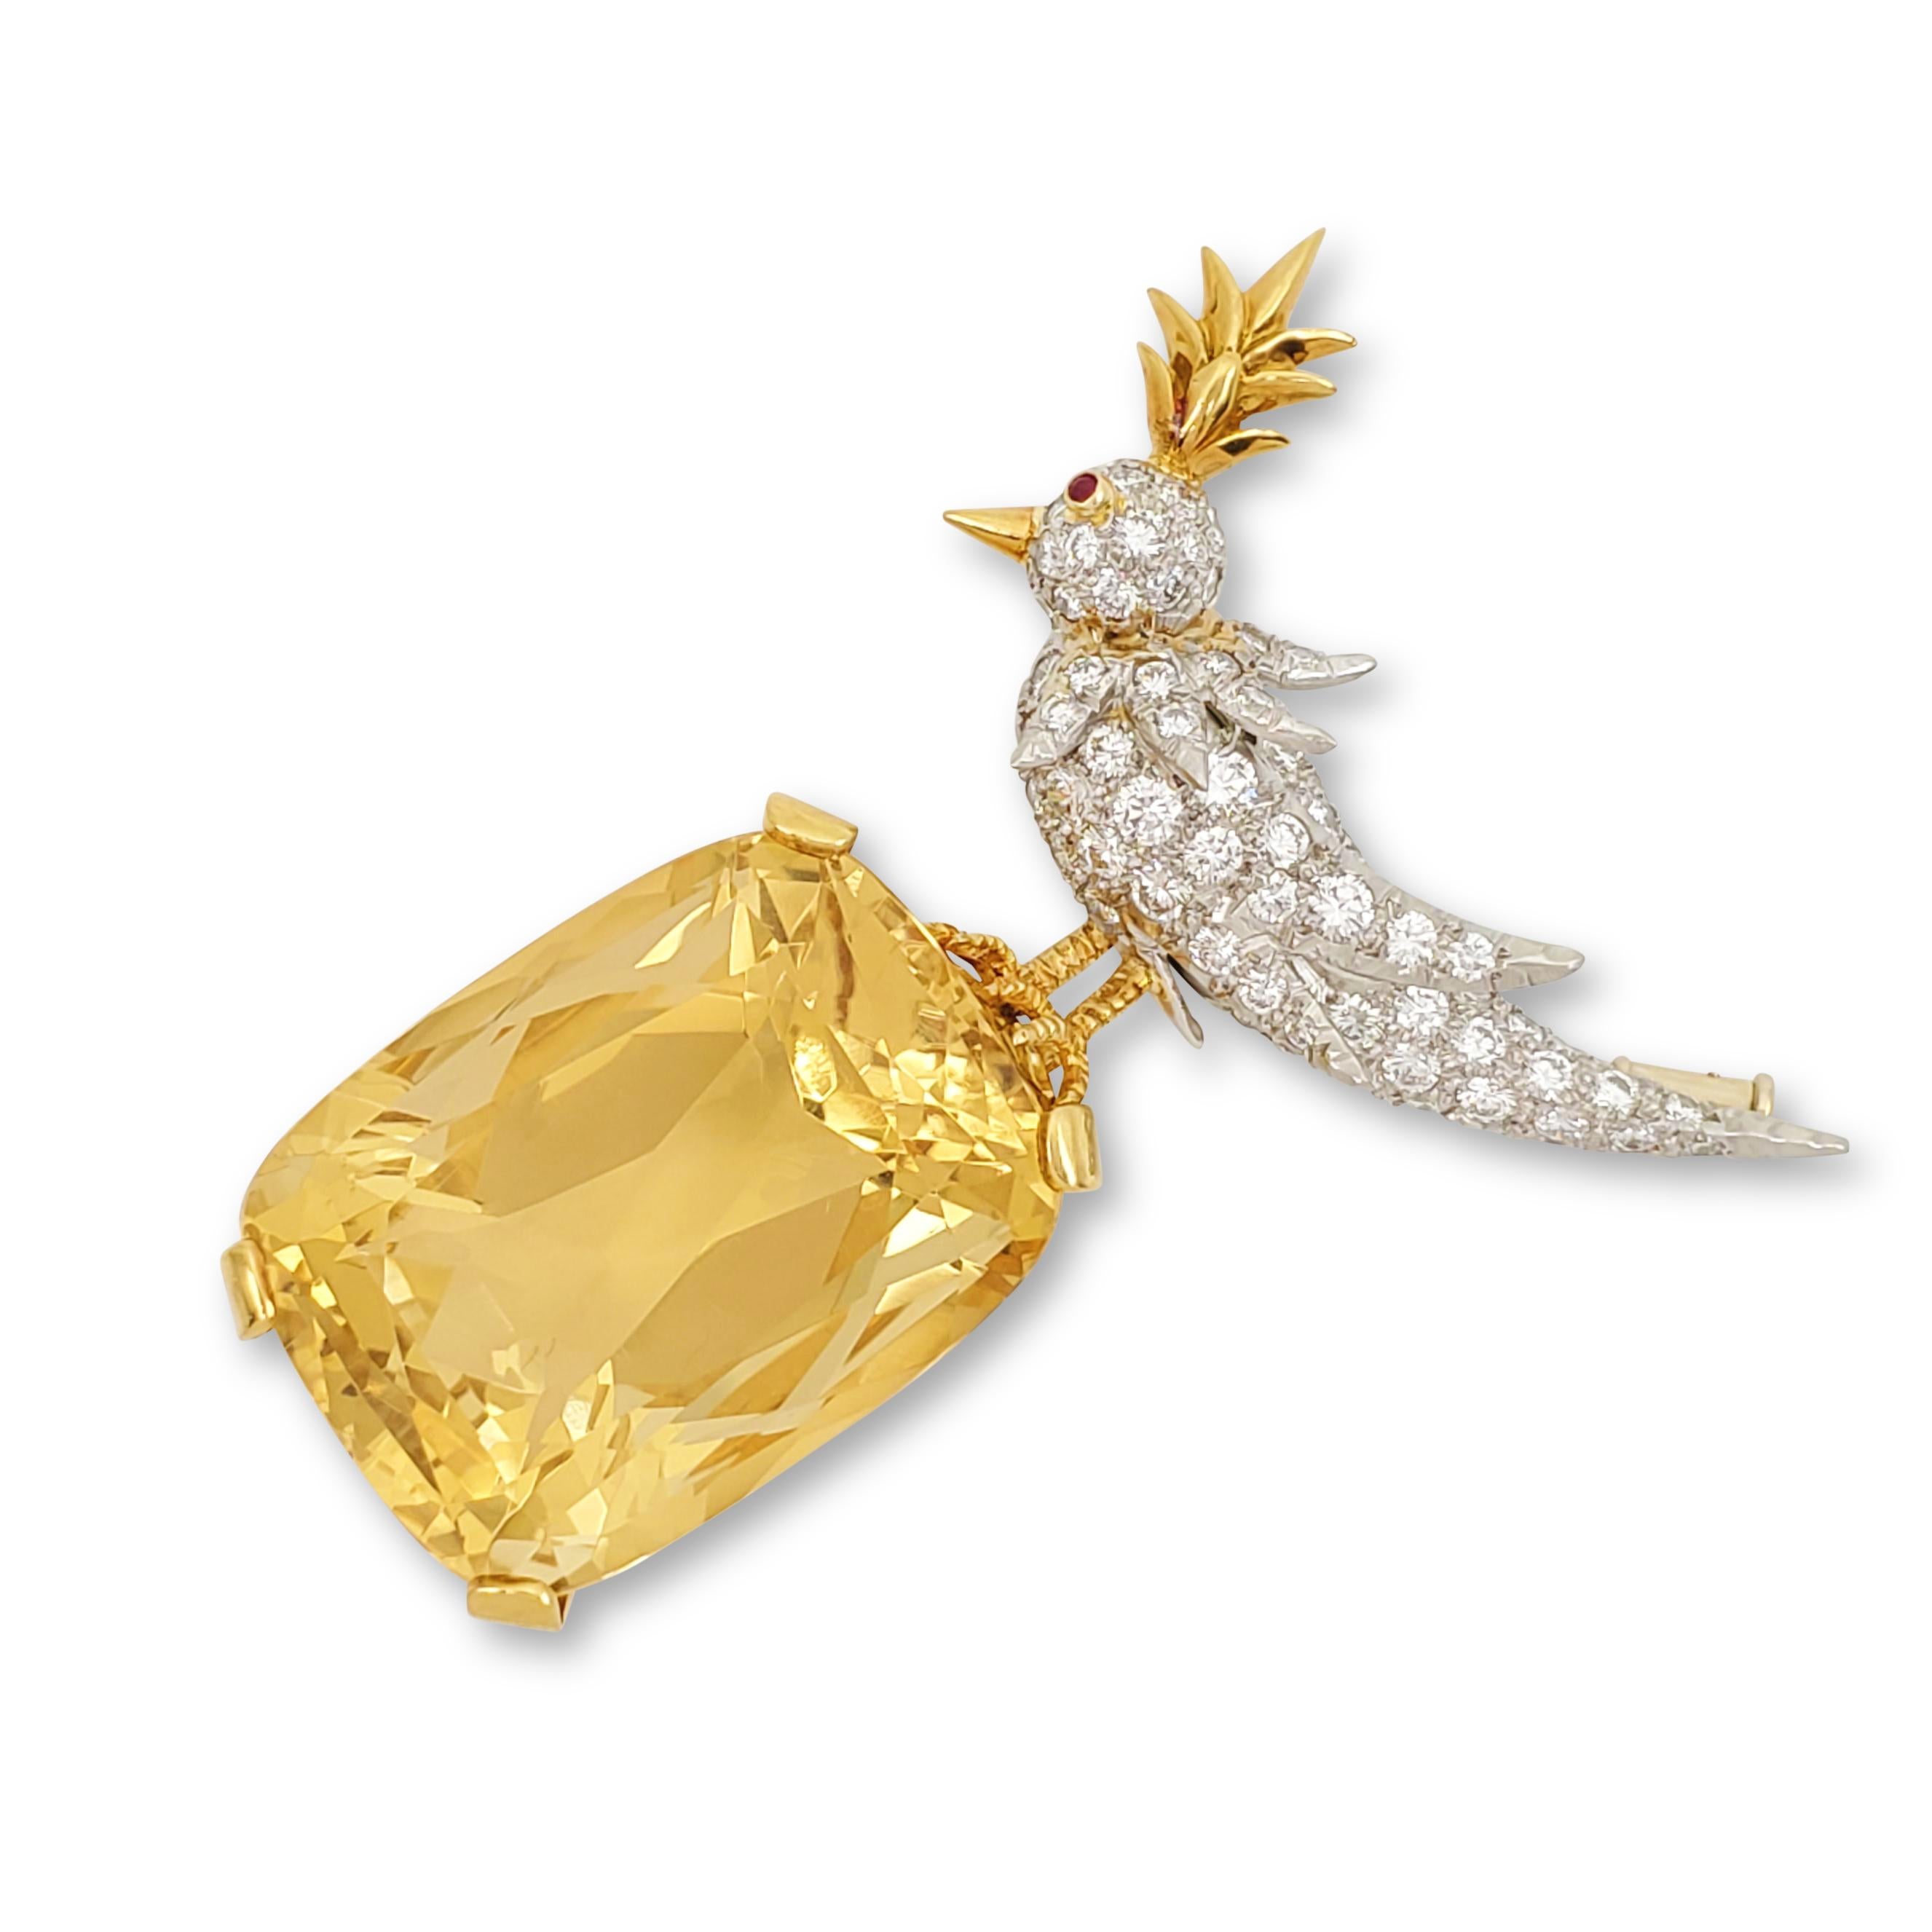 Authentic 'Bird on a Rock' brooch designed by Jean Schlumberger for Tiffany & Co.  Crafted in Platinum and 18 karat yellow gold, the brooch features a dazzling cushion-shaped citrine of 53 carats, 1 round cut ruby of 0.01 carat, and 71 round